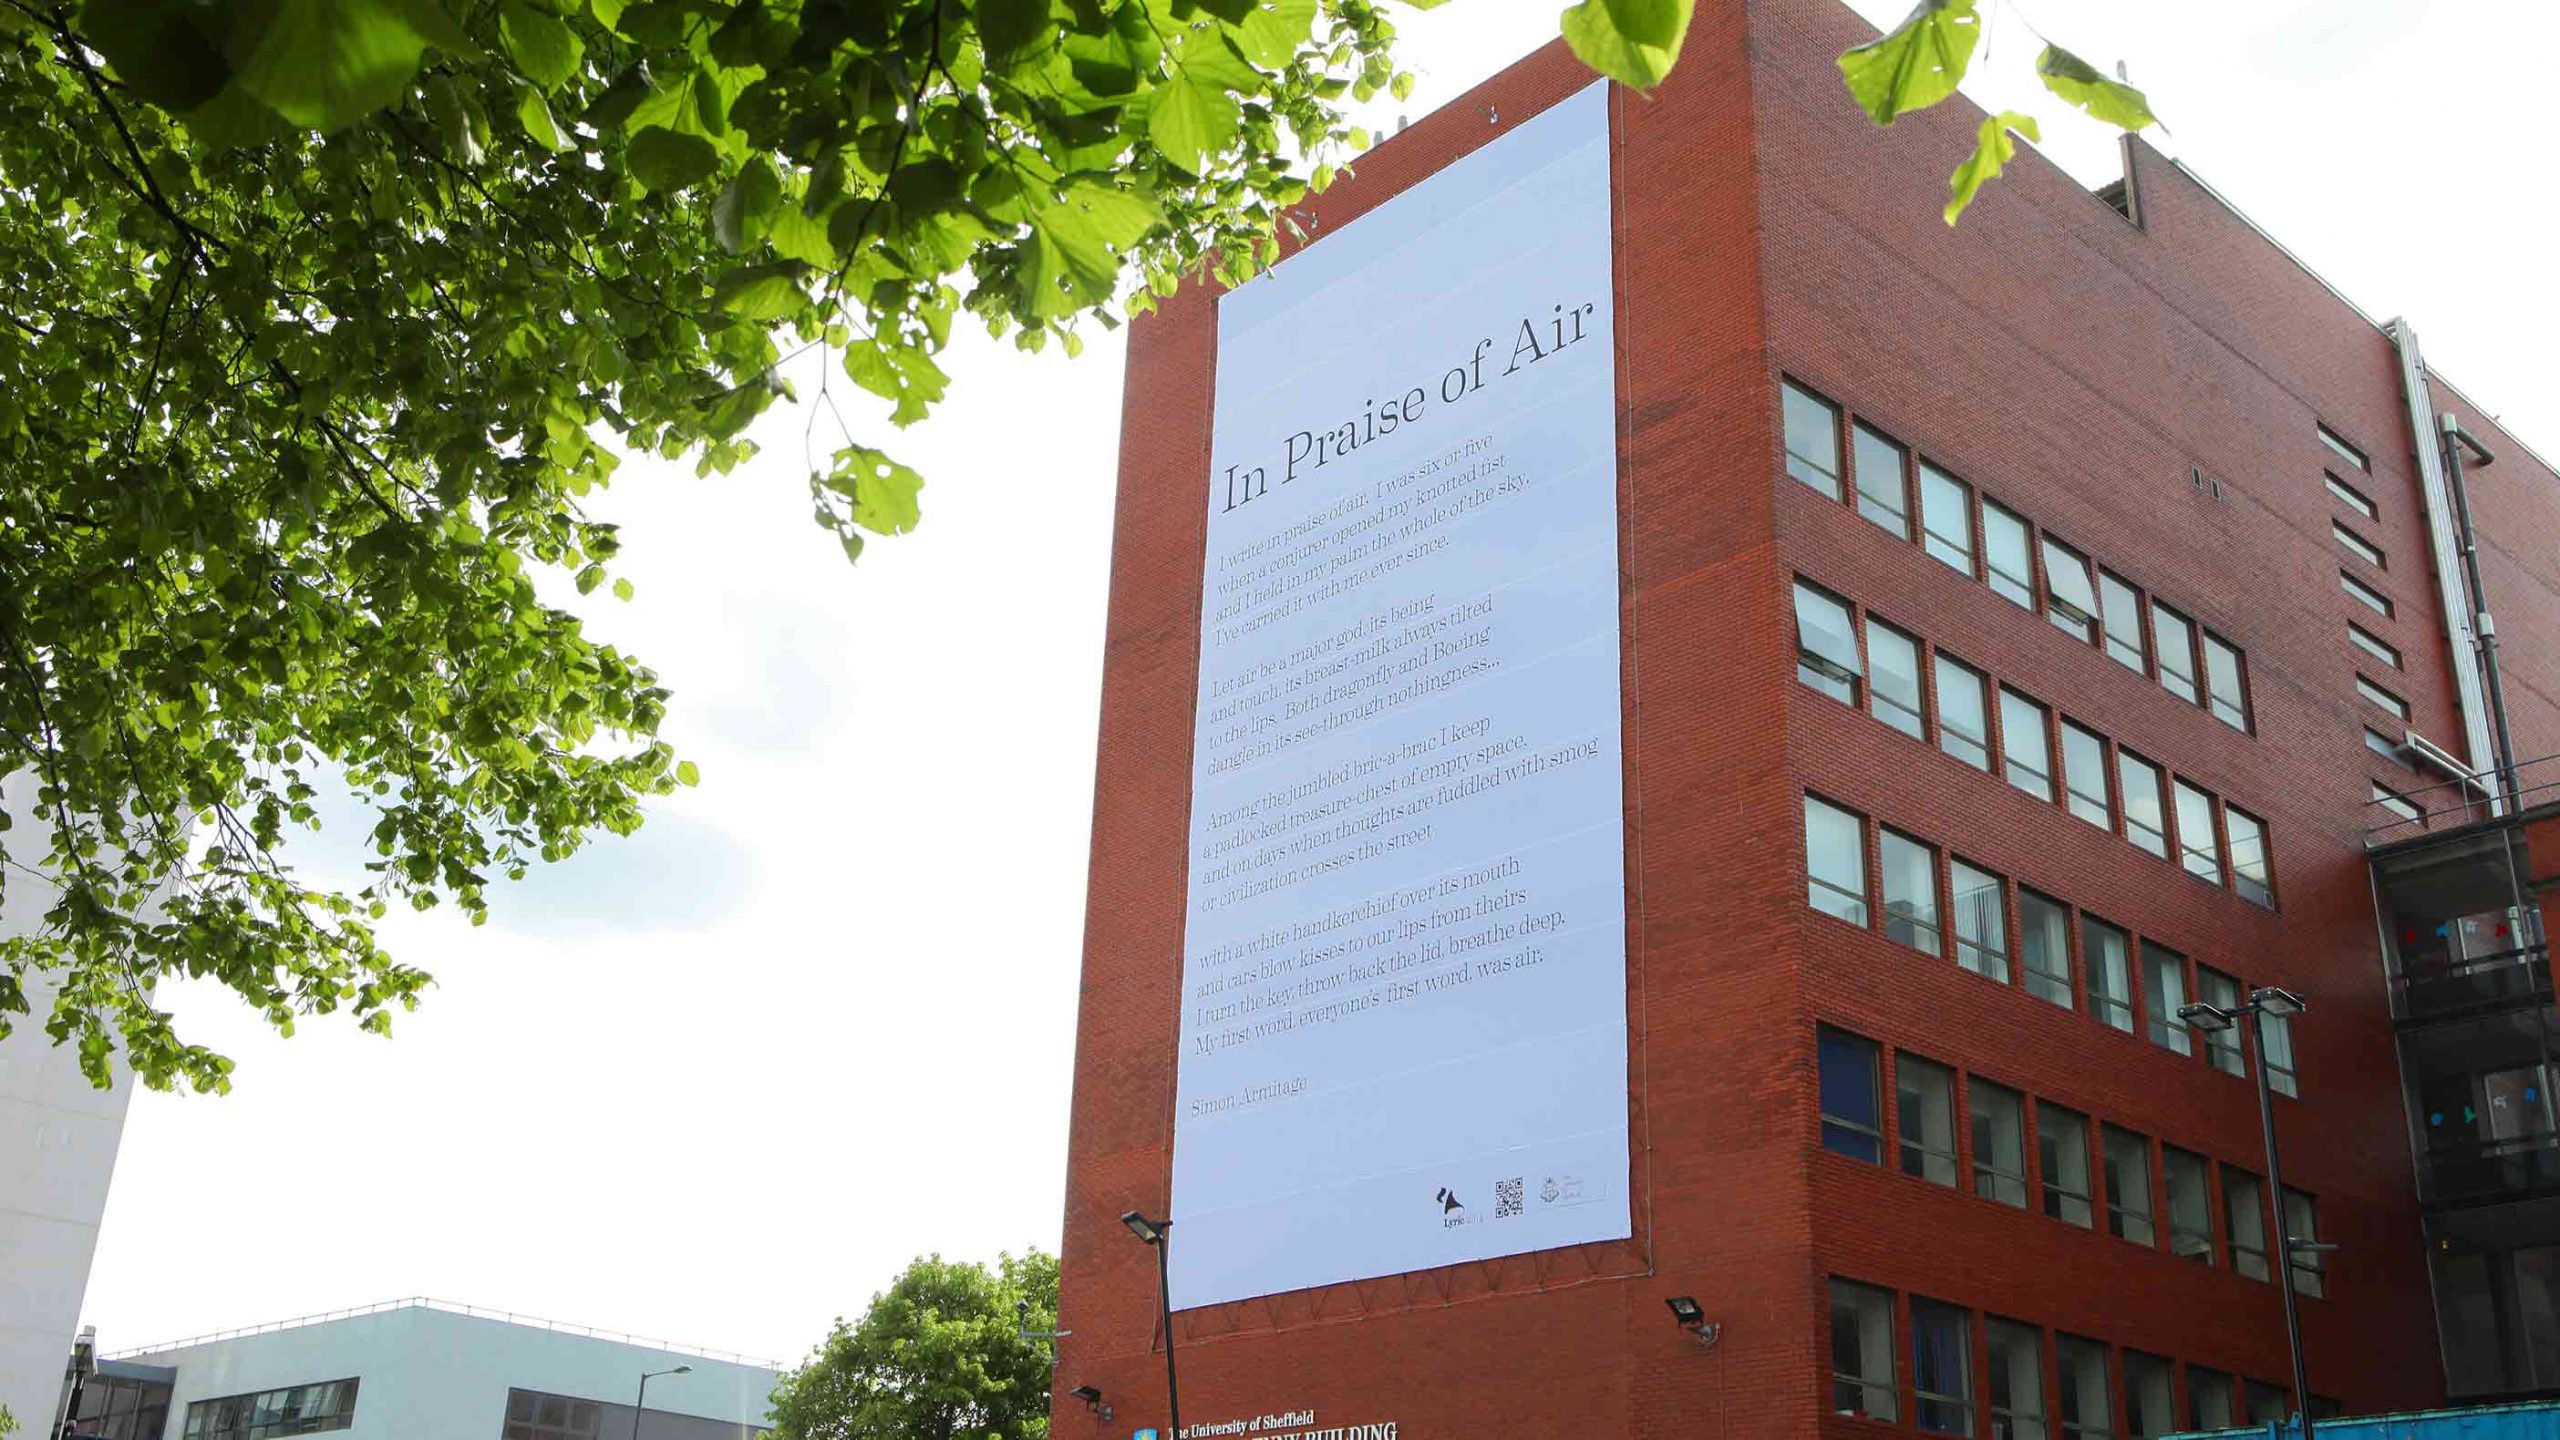 world’s first catalytic poem In Praise of Air